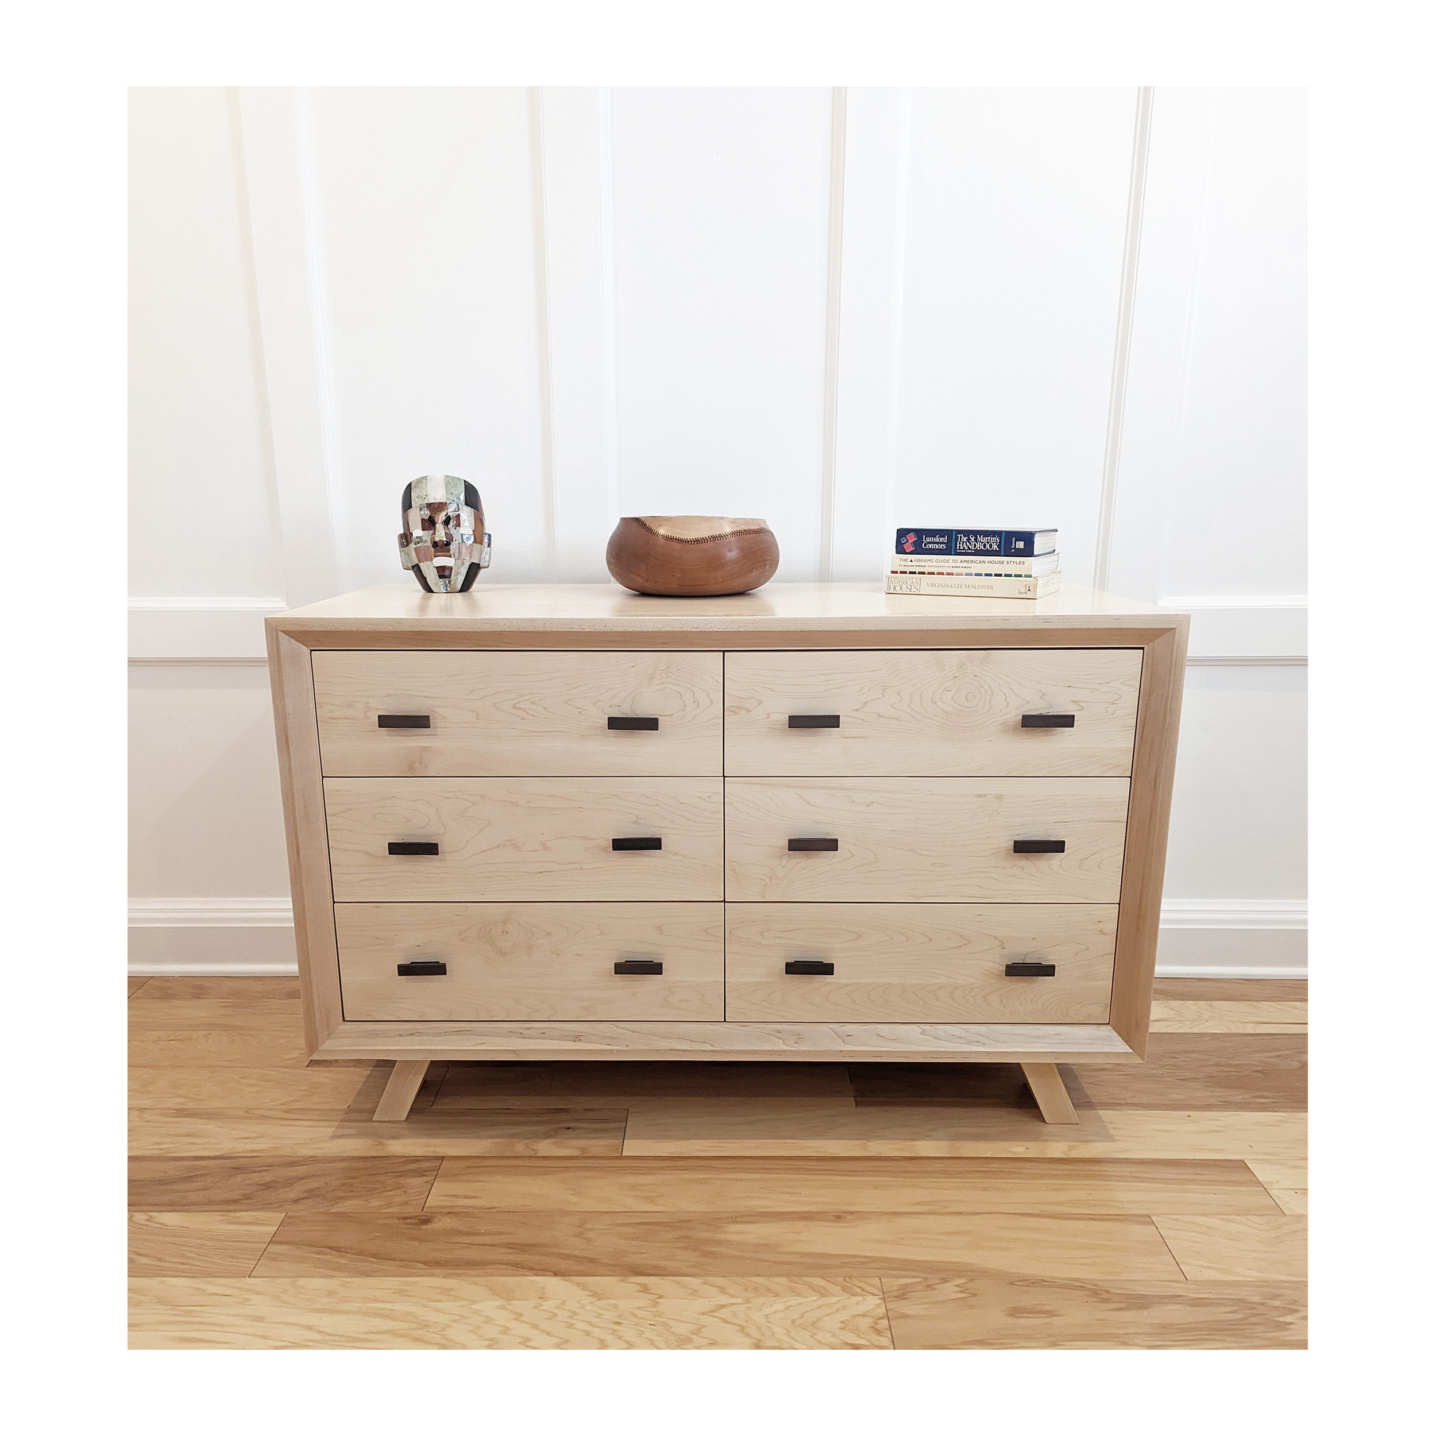 Maple Dresser at 4 feet in width--Made by 57NorthPlank Tailored Modern Furniture